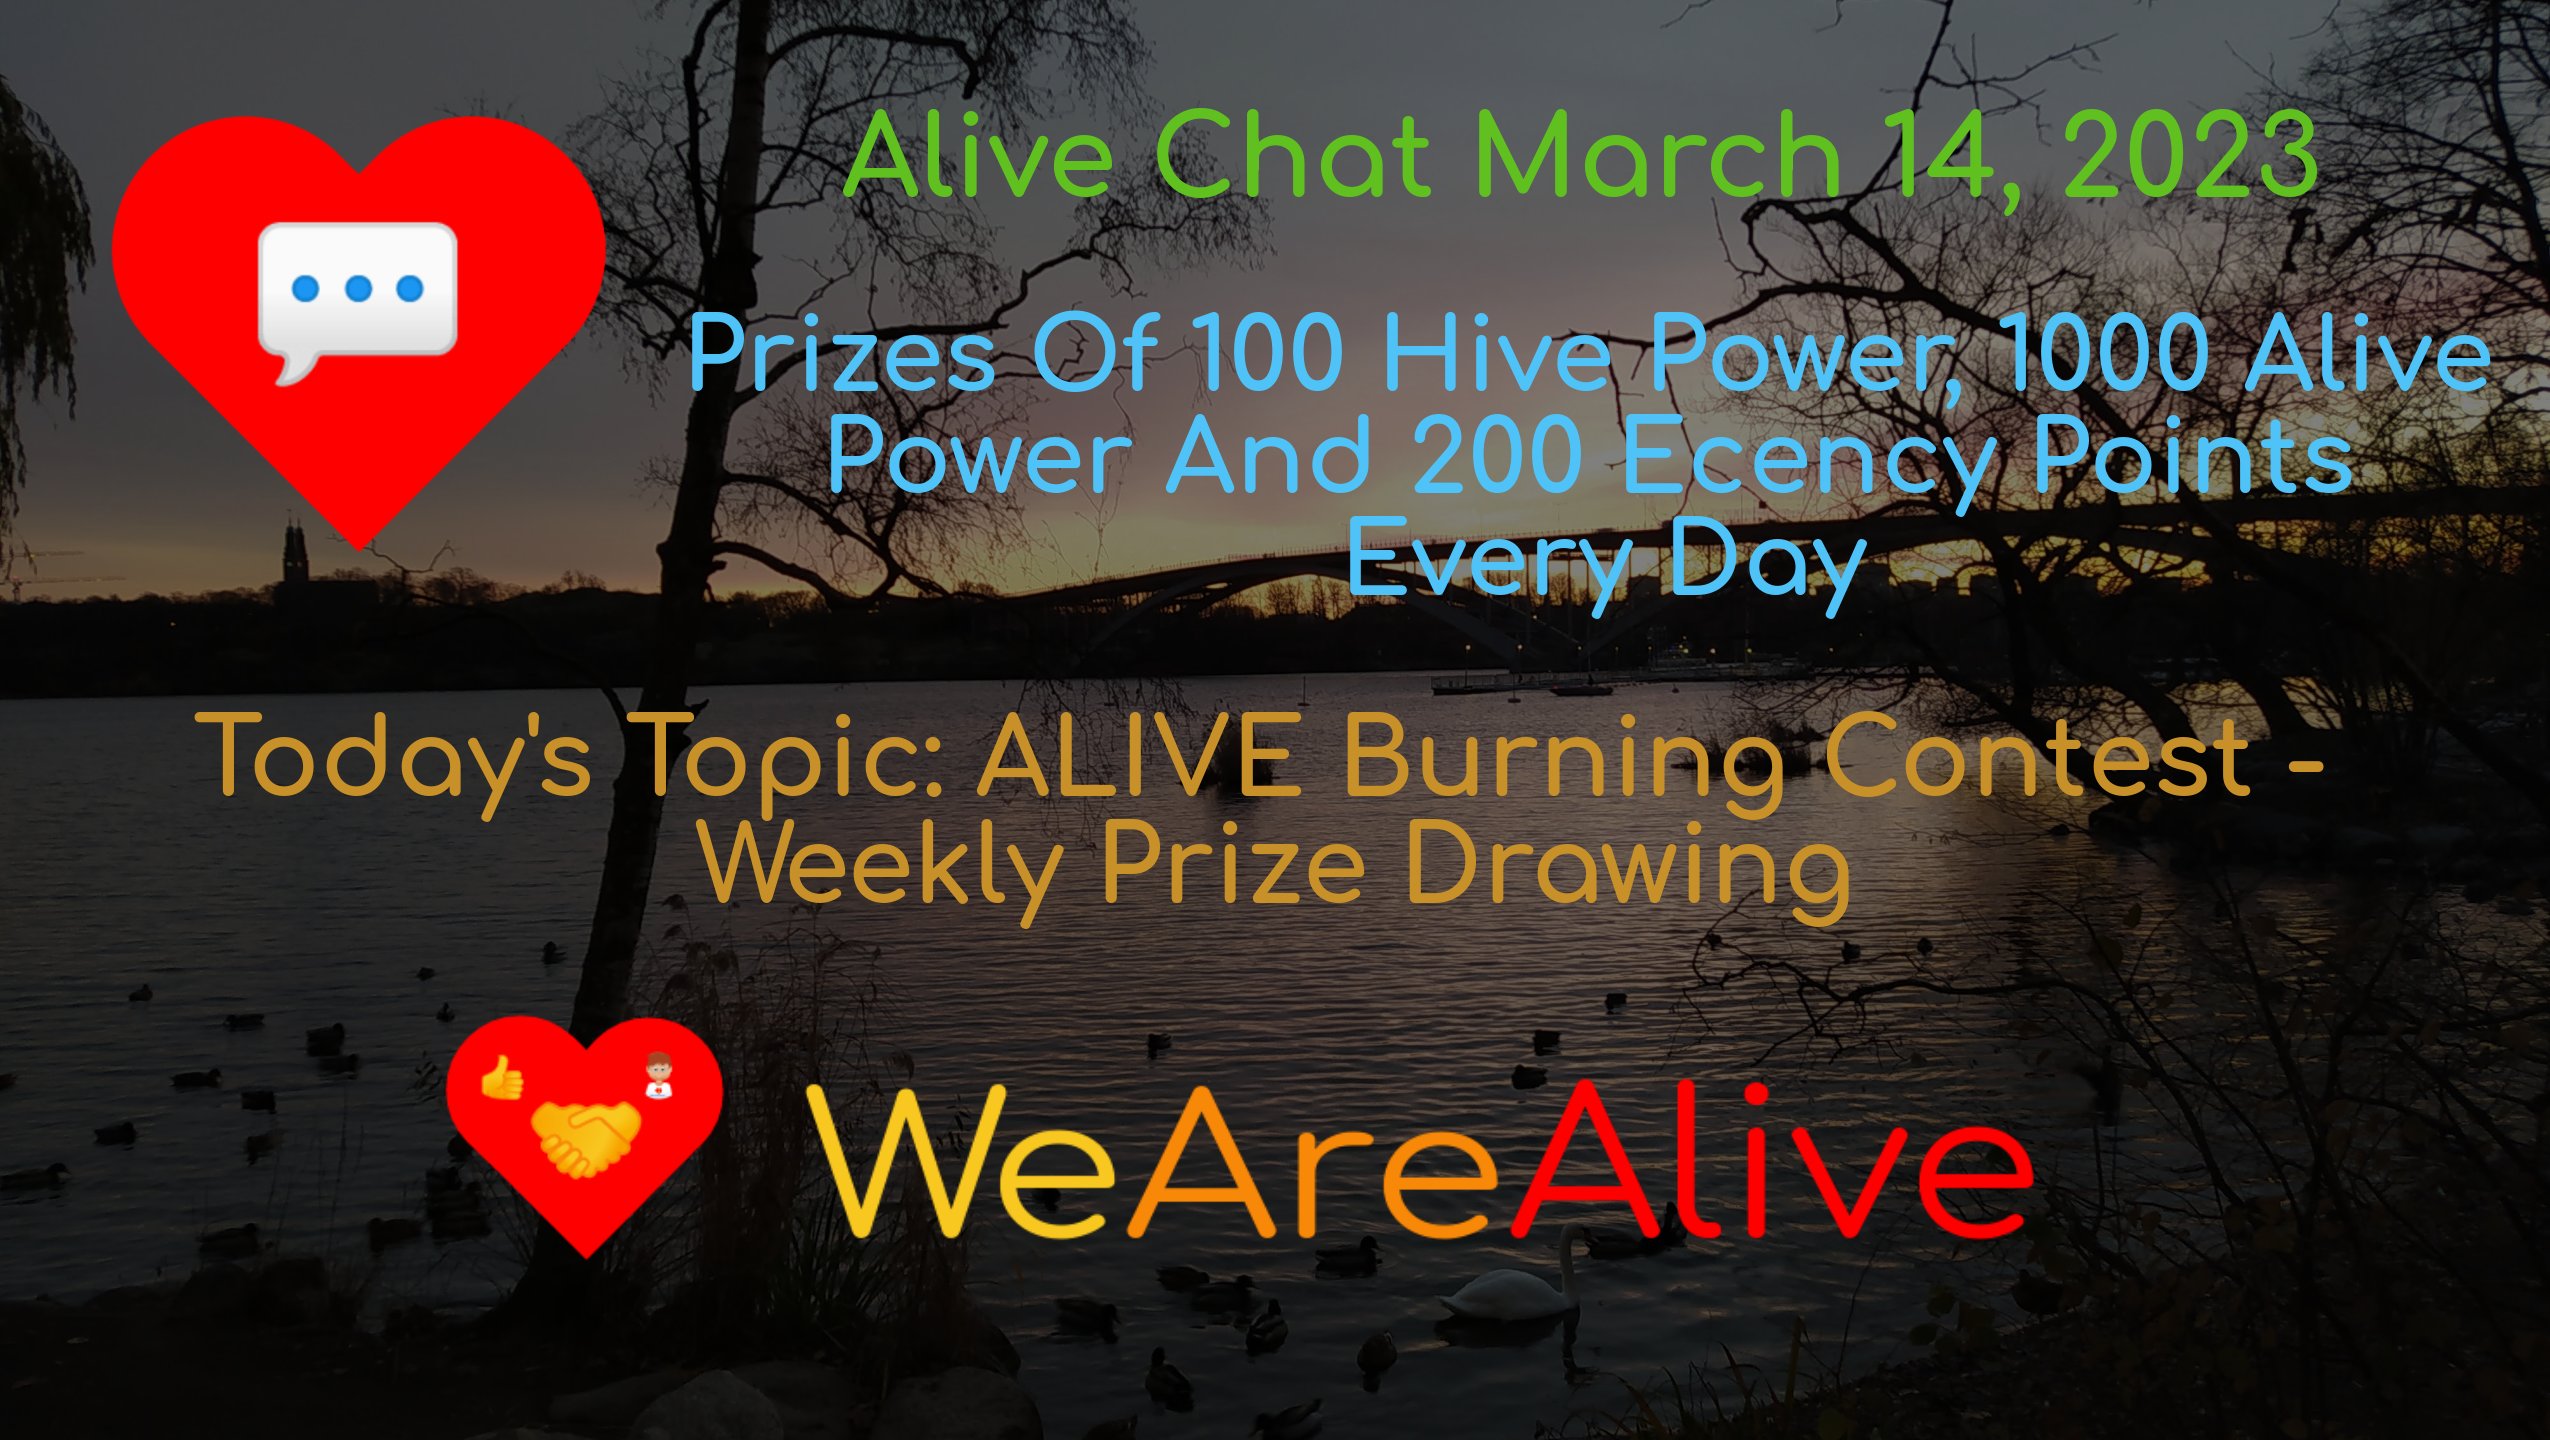 @alive.chat/alive-chat-march-14-2023